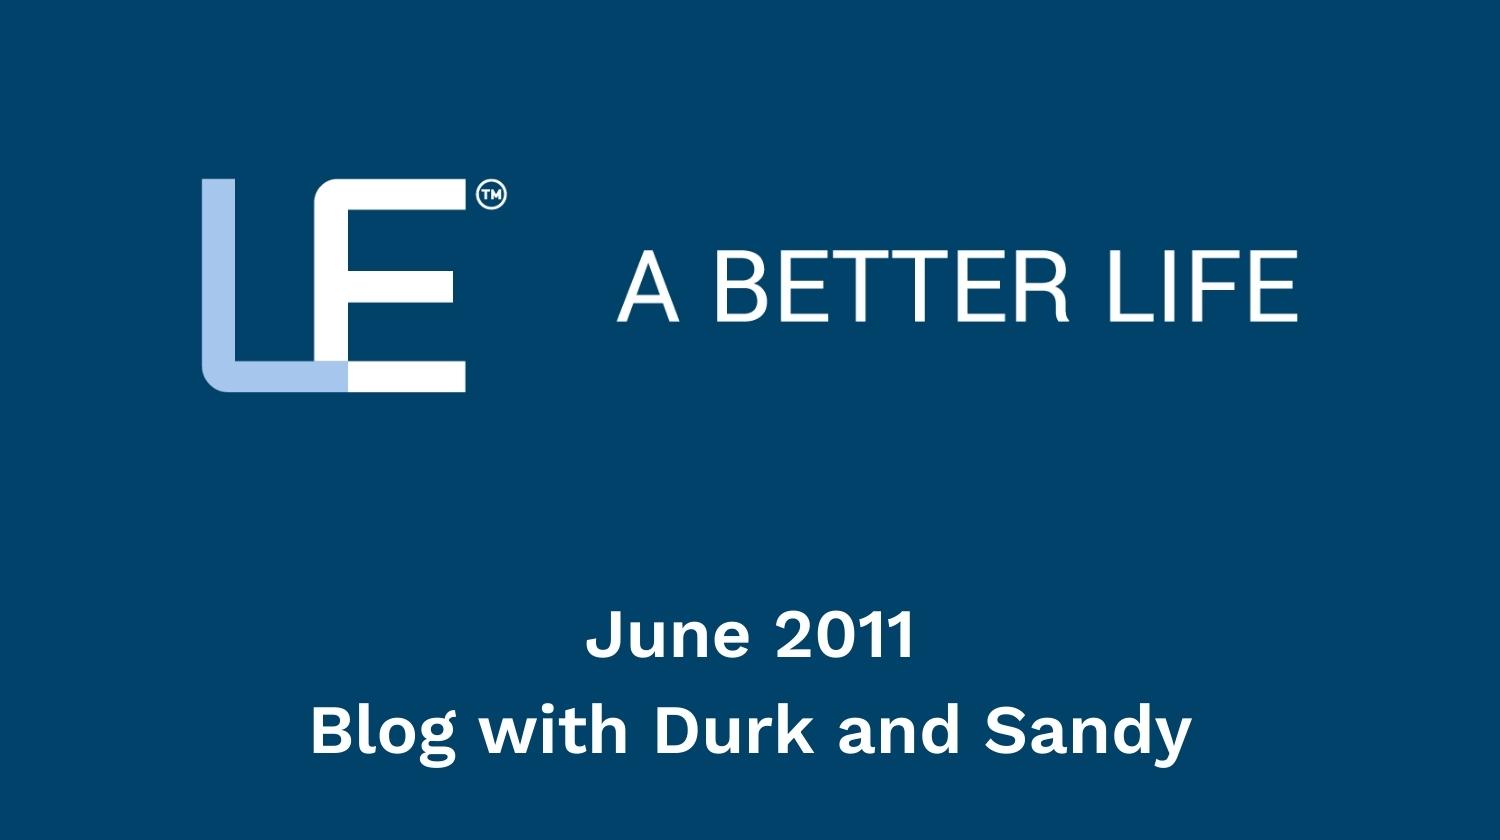 June 2011 Blog with Durk and Sandy